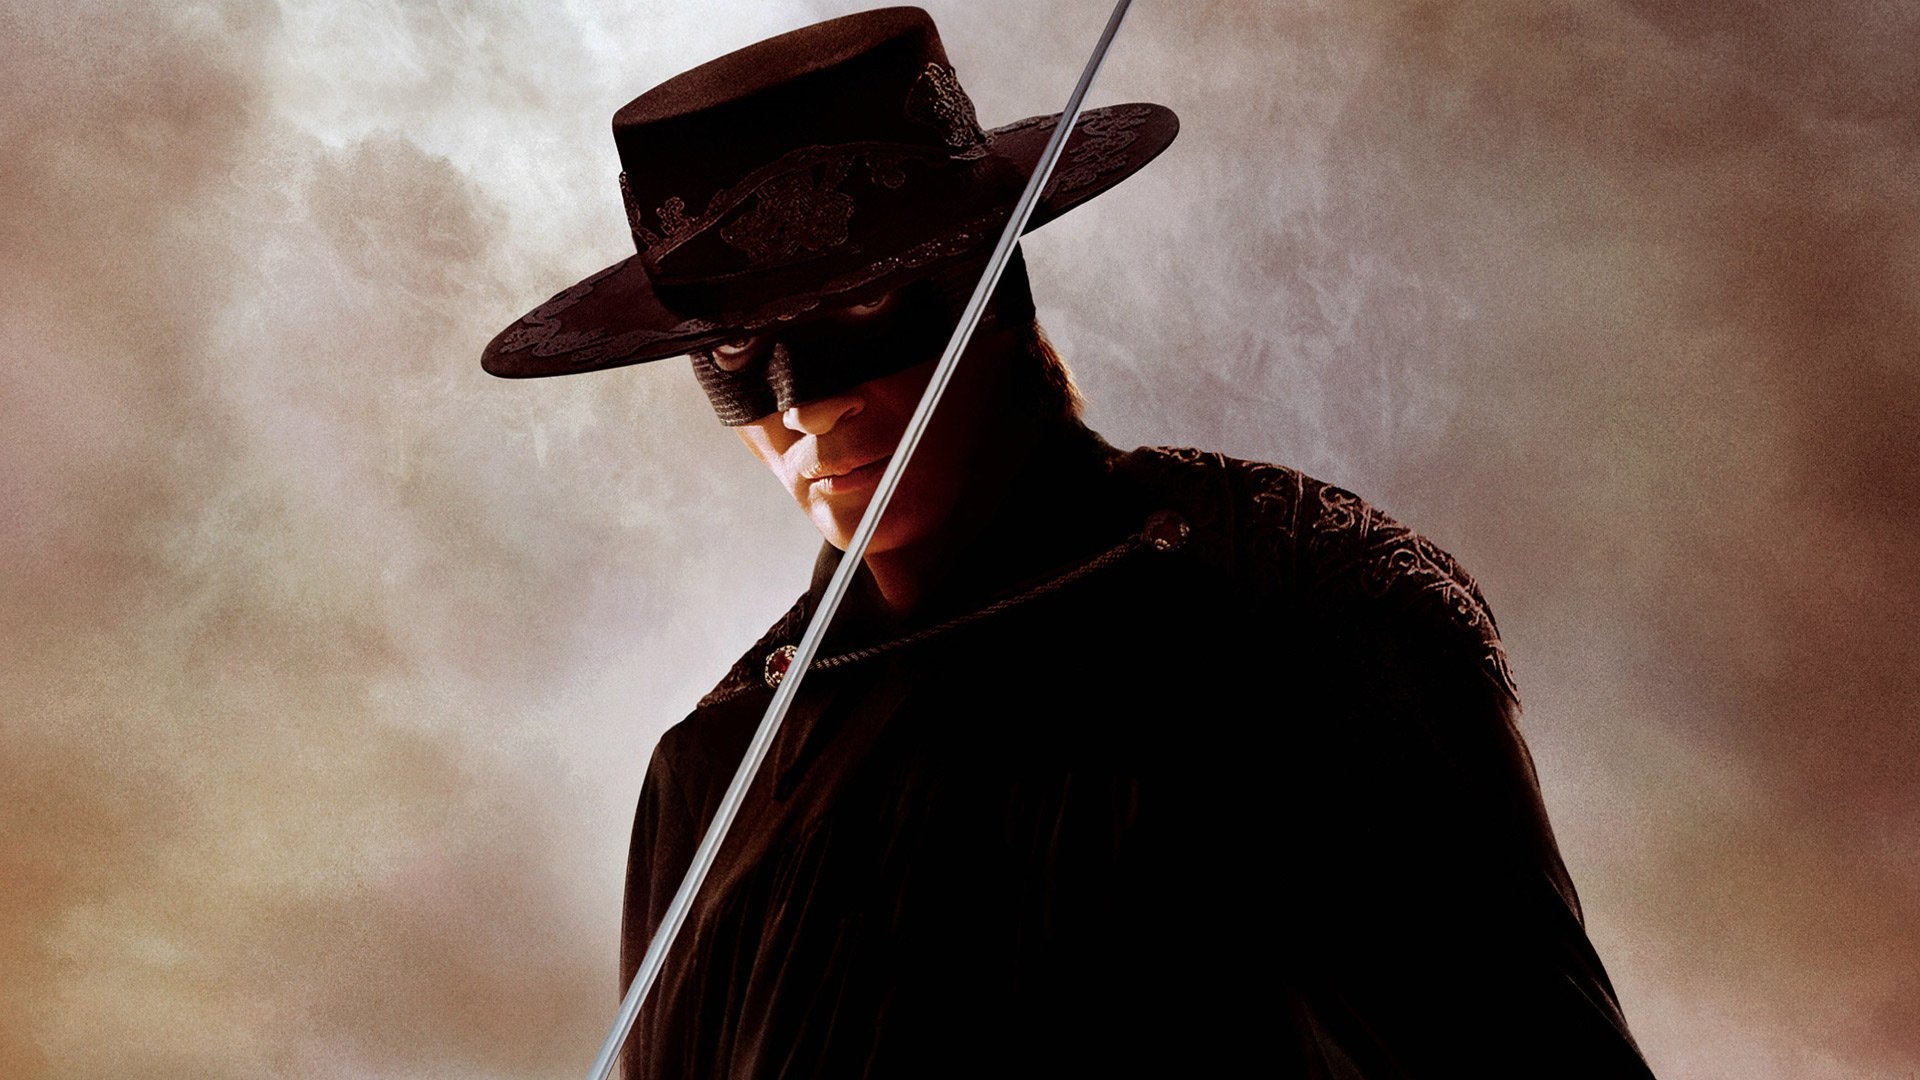 The Legend of Zorro: The film was theatrically released on October 28, 2005. 1920x1080 Full HD Background.